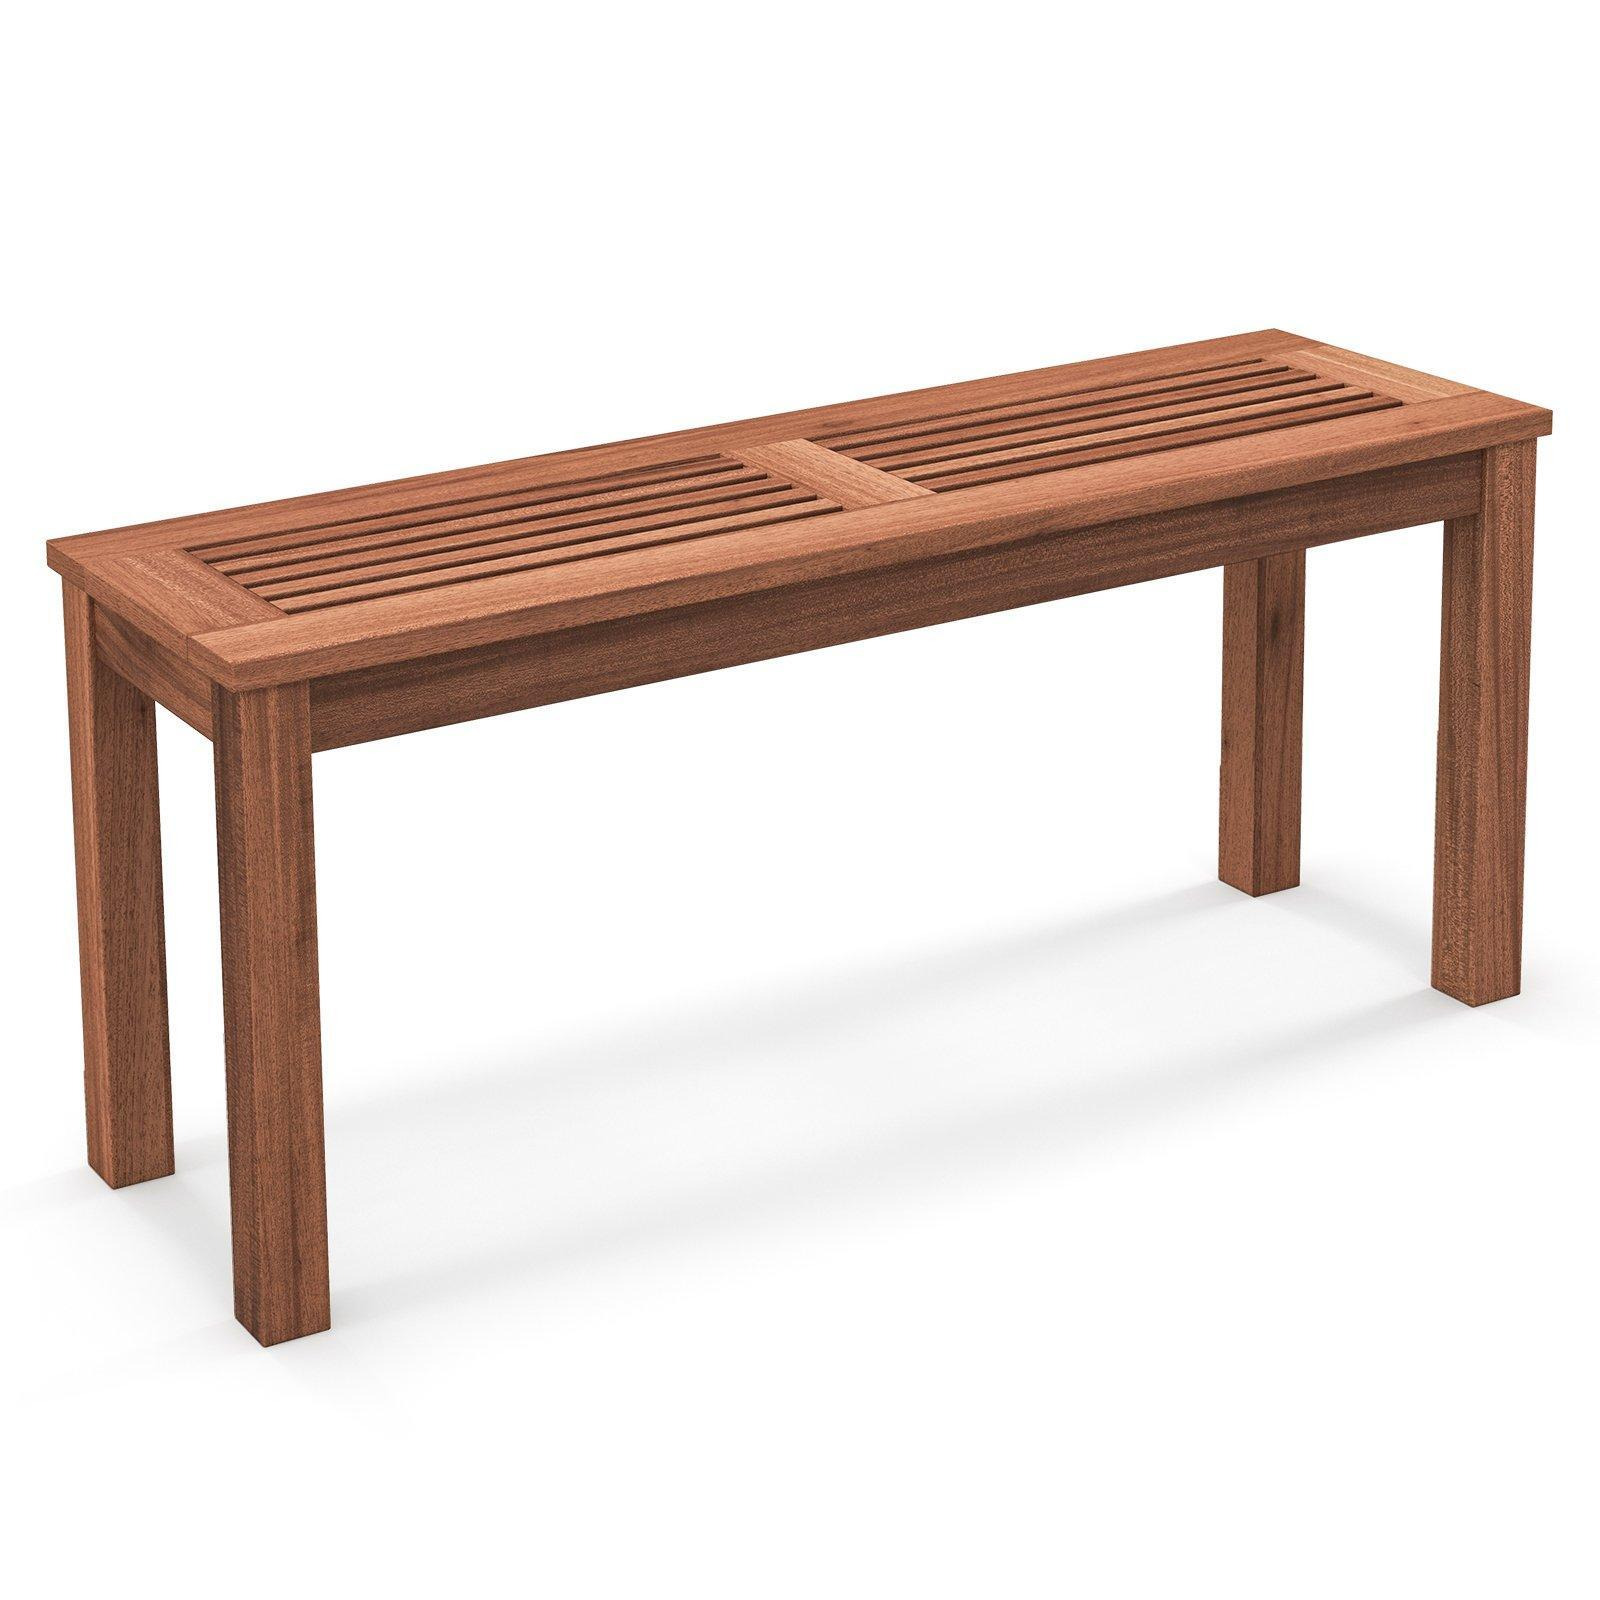 100cm Patio Wood Bench 2-Person Solid Wood Bench Dining Bench w/ Slatted Seat - image 1